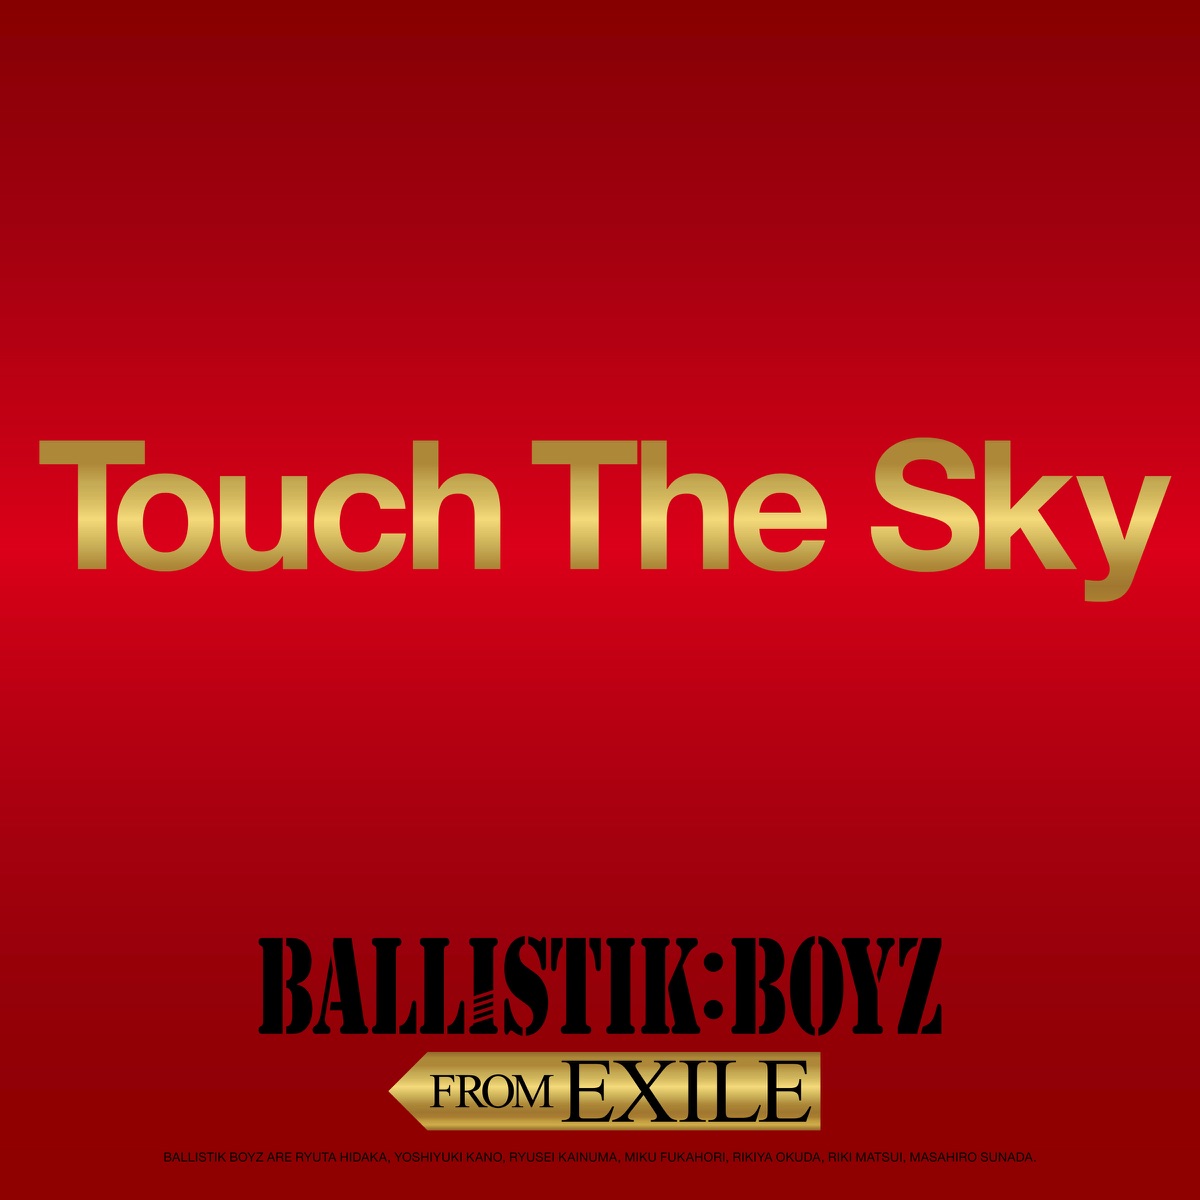 Cover art for『BALLISTIK BOYZ from EXILE TRIBE - Touch The Sky』from the release『Touch The Sky